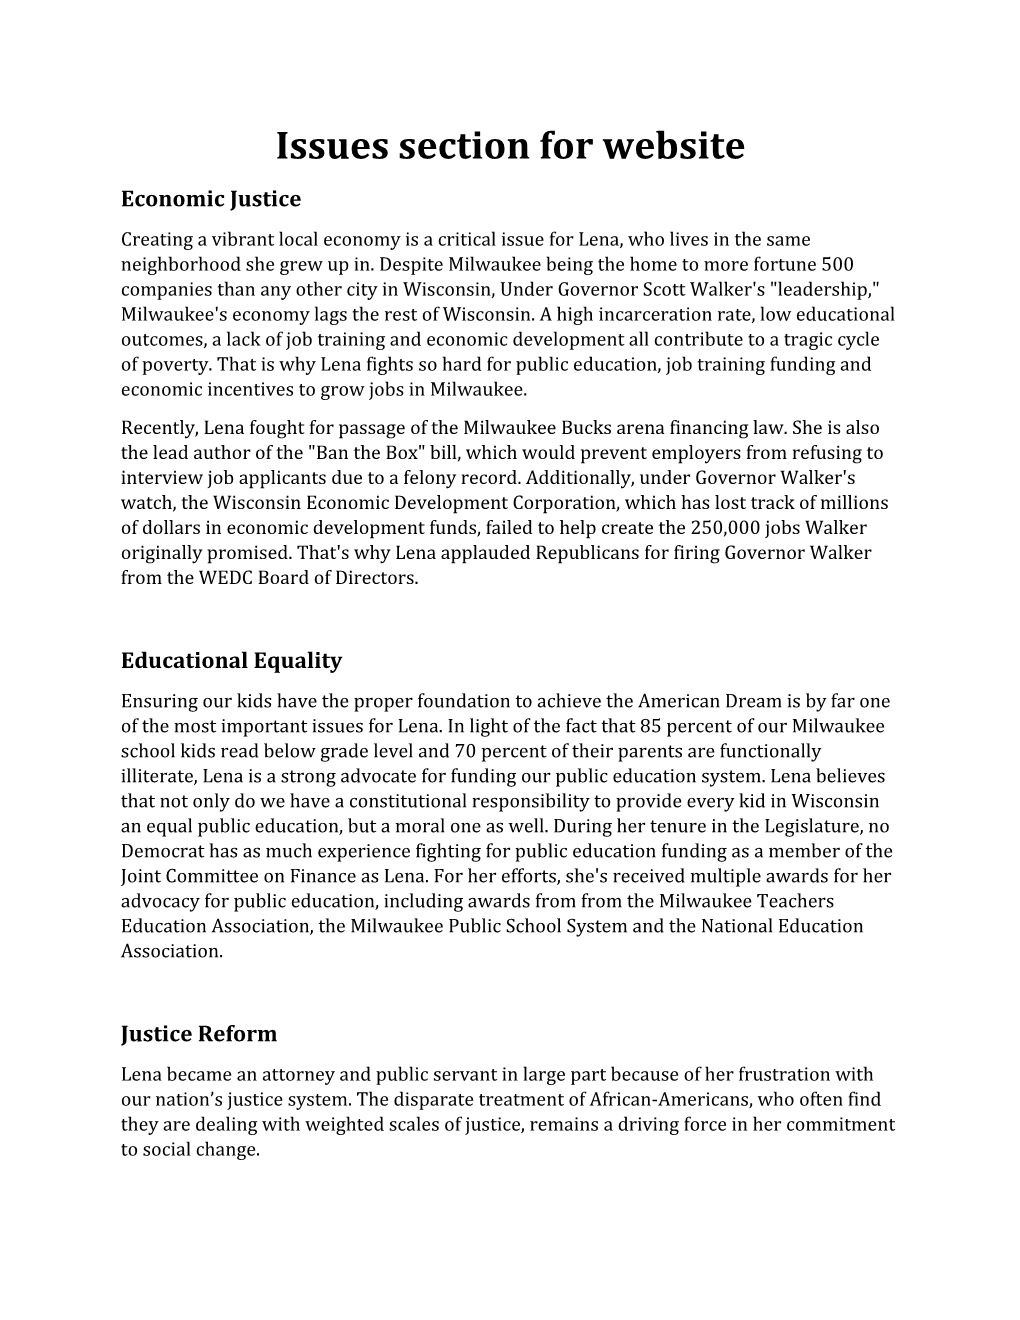 Issues Section for Website